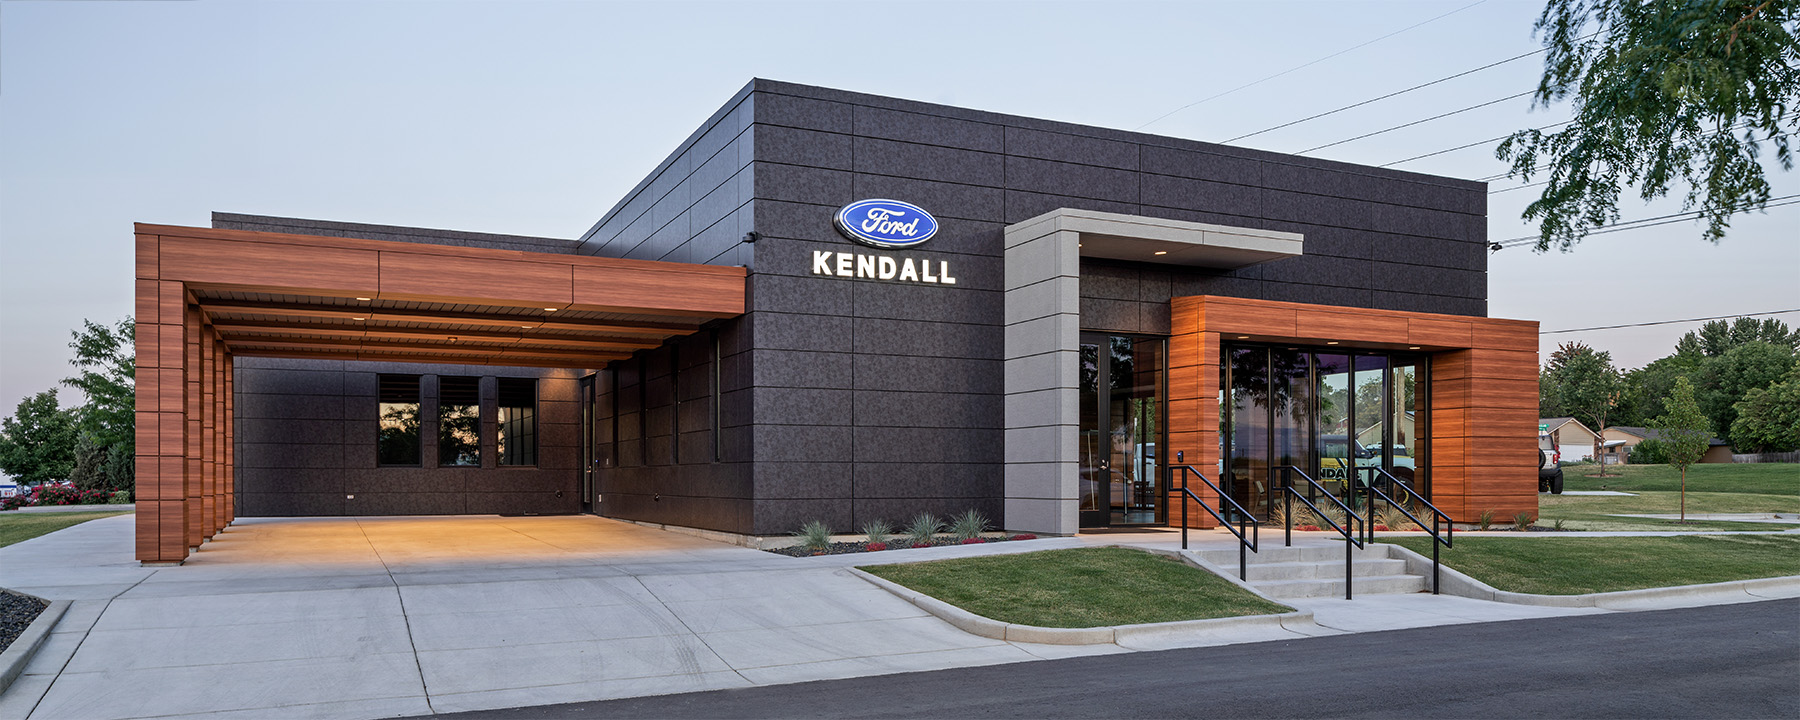 Recessed can lights illuminate the entrance and porte cochere of the Kendall Ford Bronco car dealership.